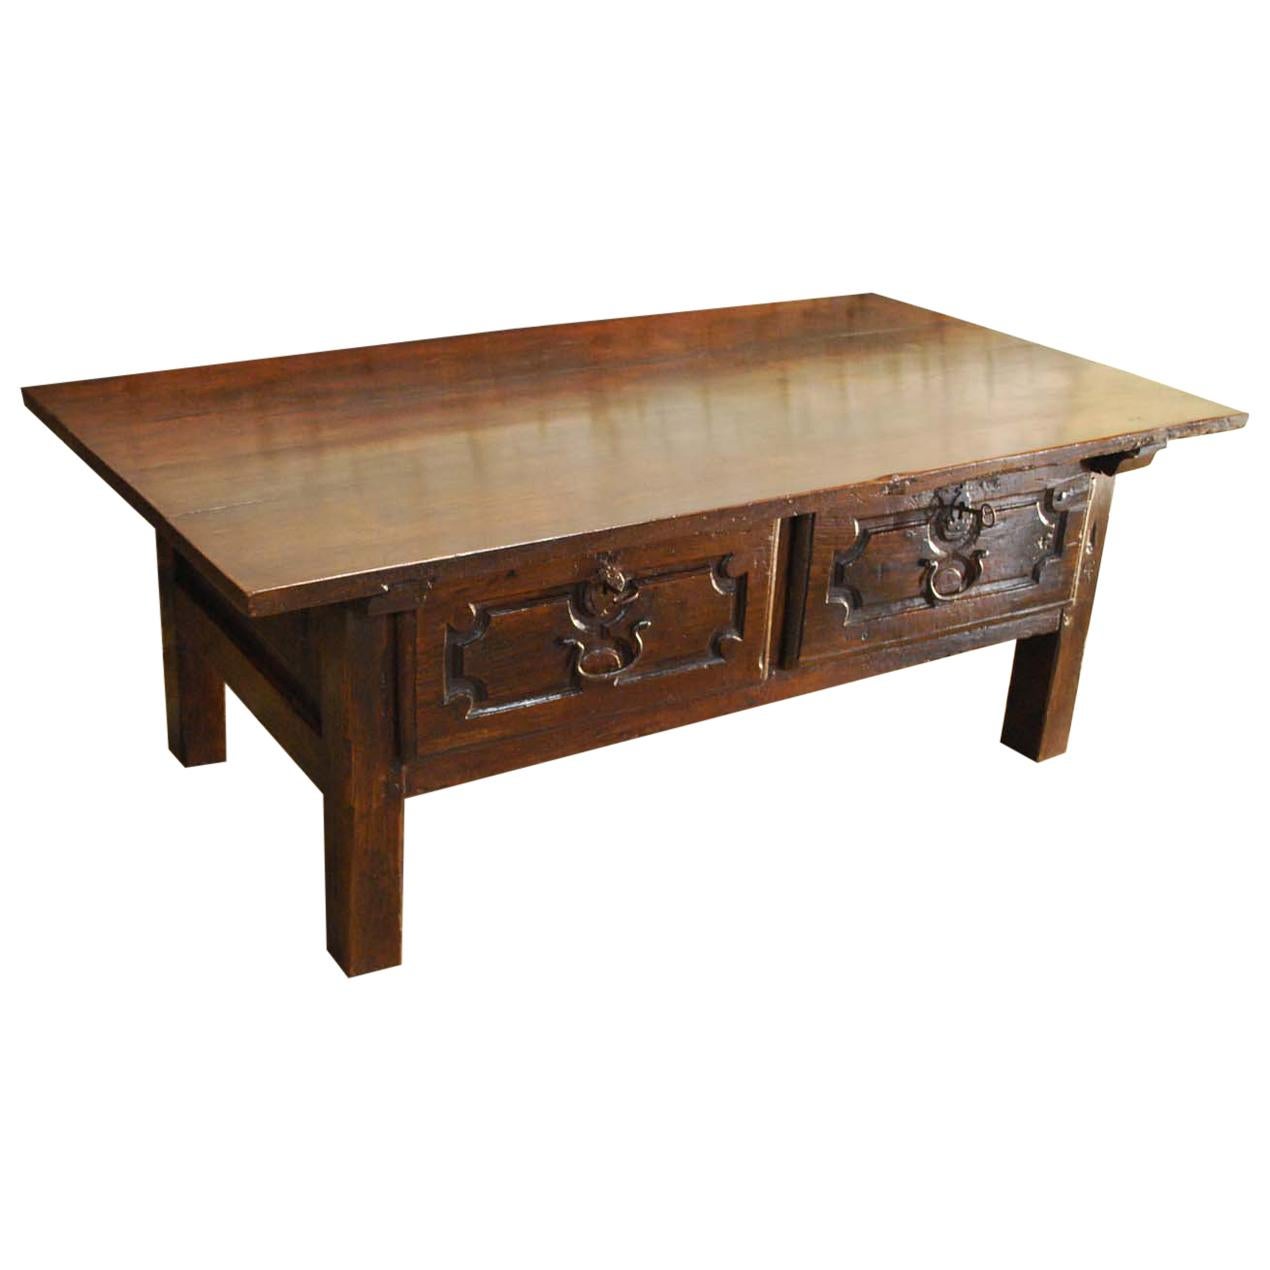 Antique 18th Century Spanish Coffee Table in Solid Chestnut Wood